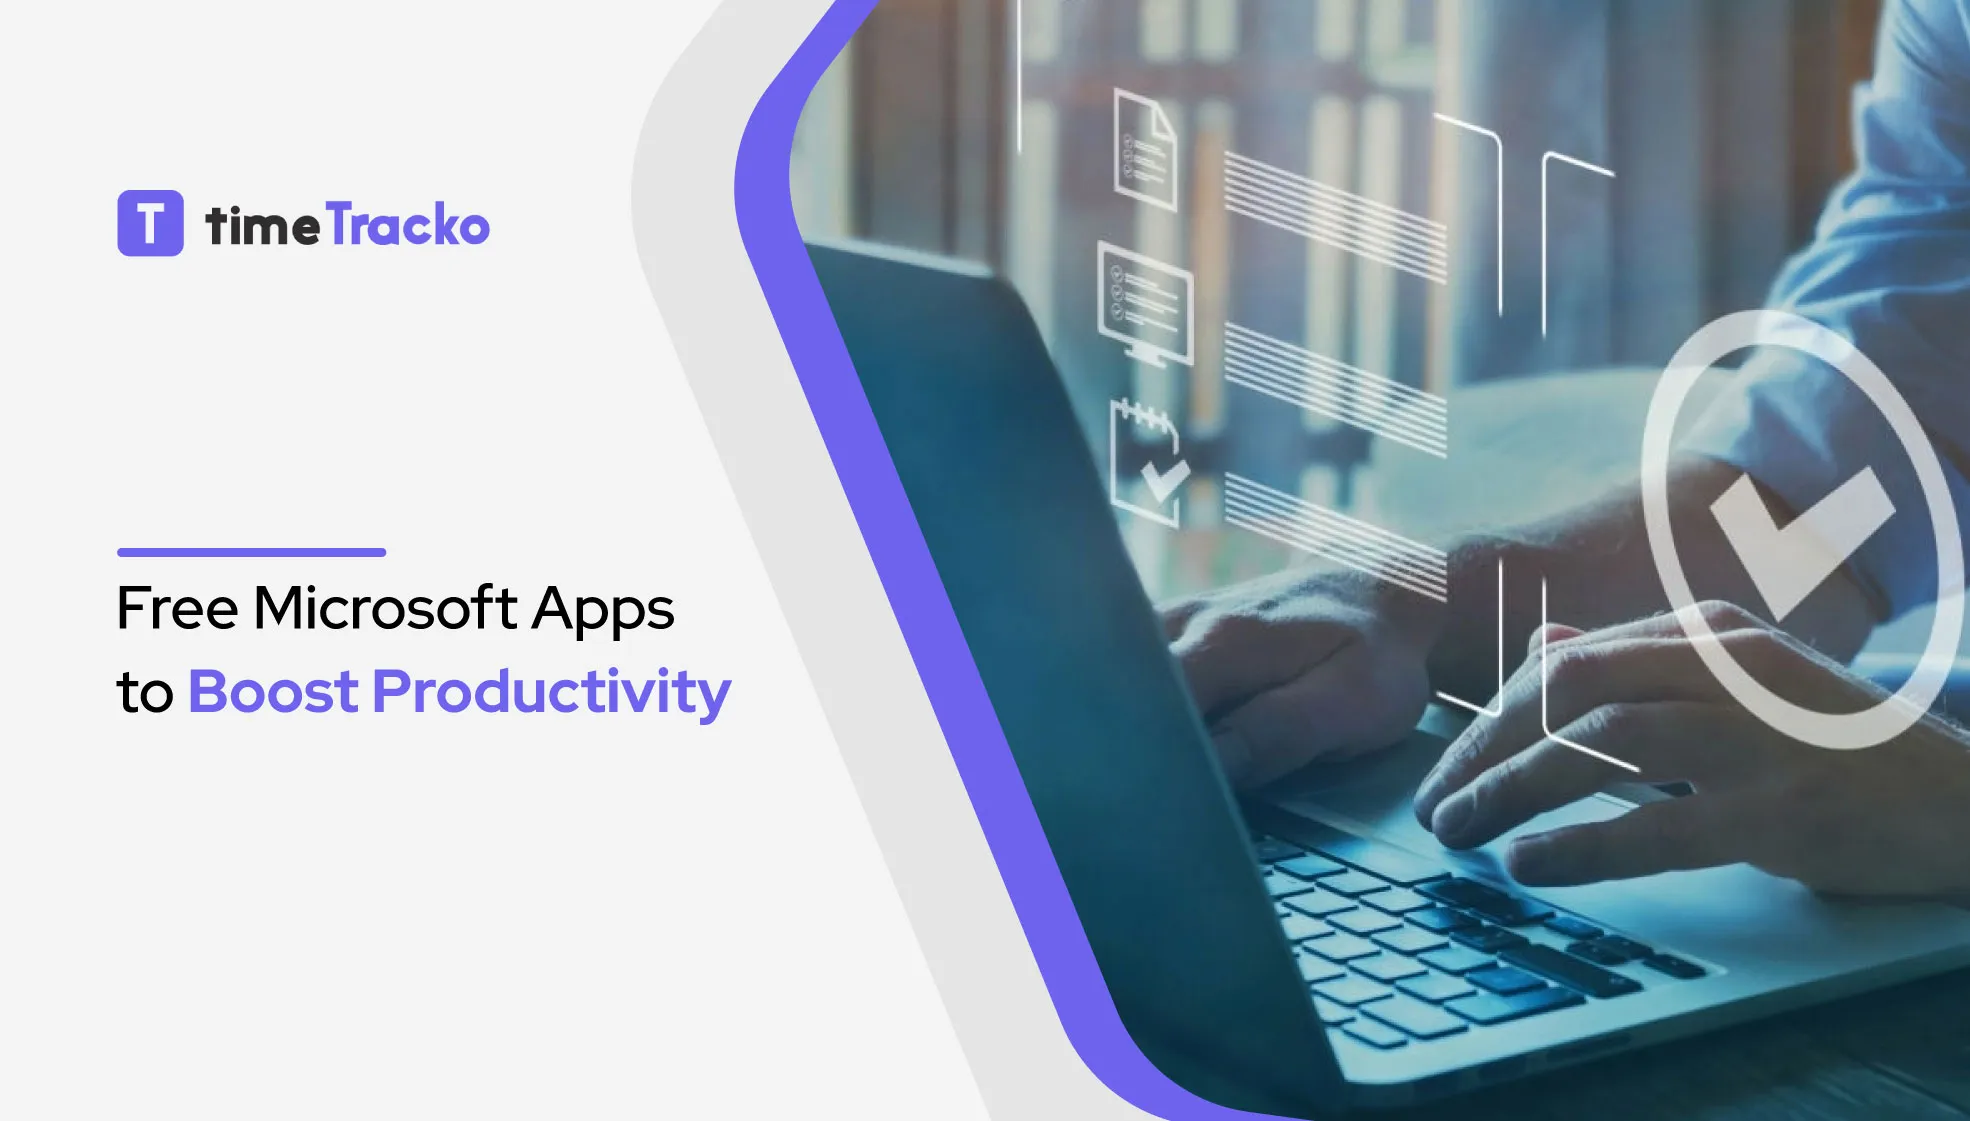 Free Microsoft Apps to Boost Productivity